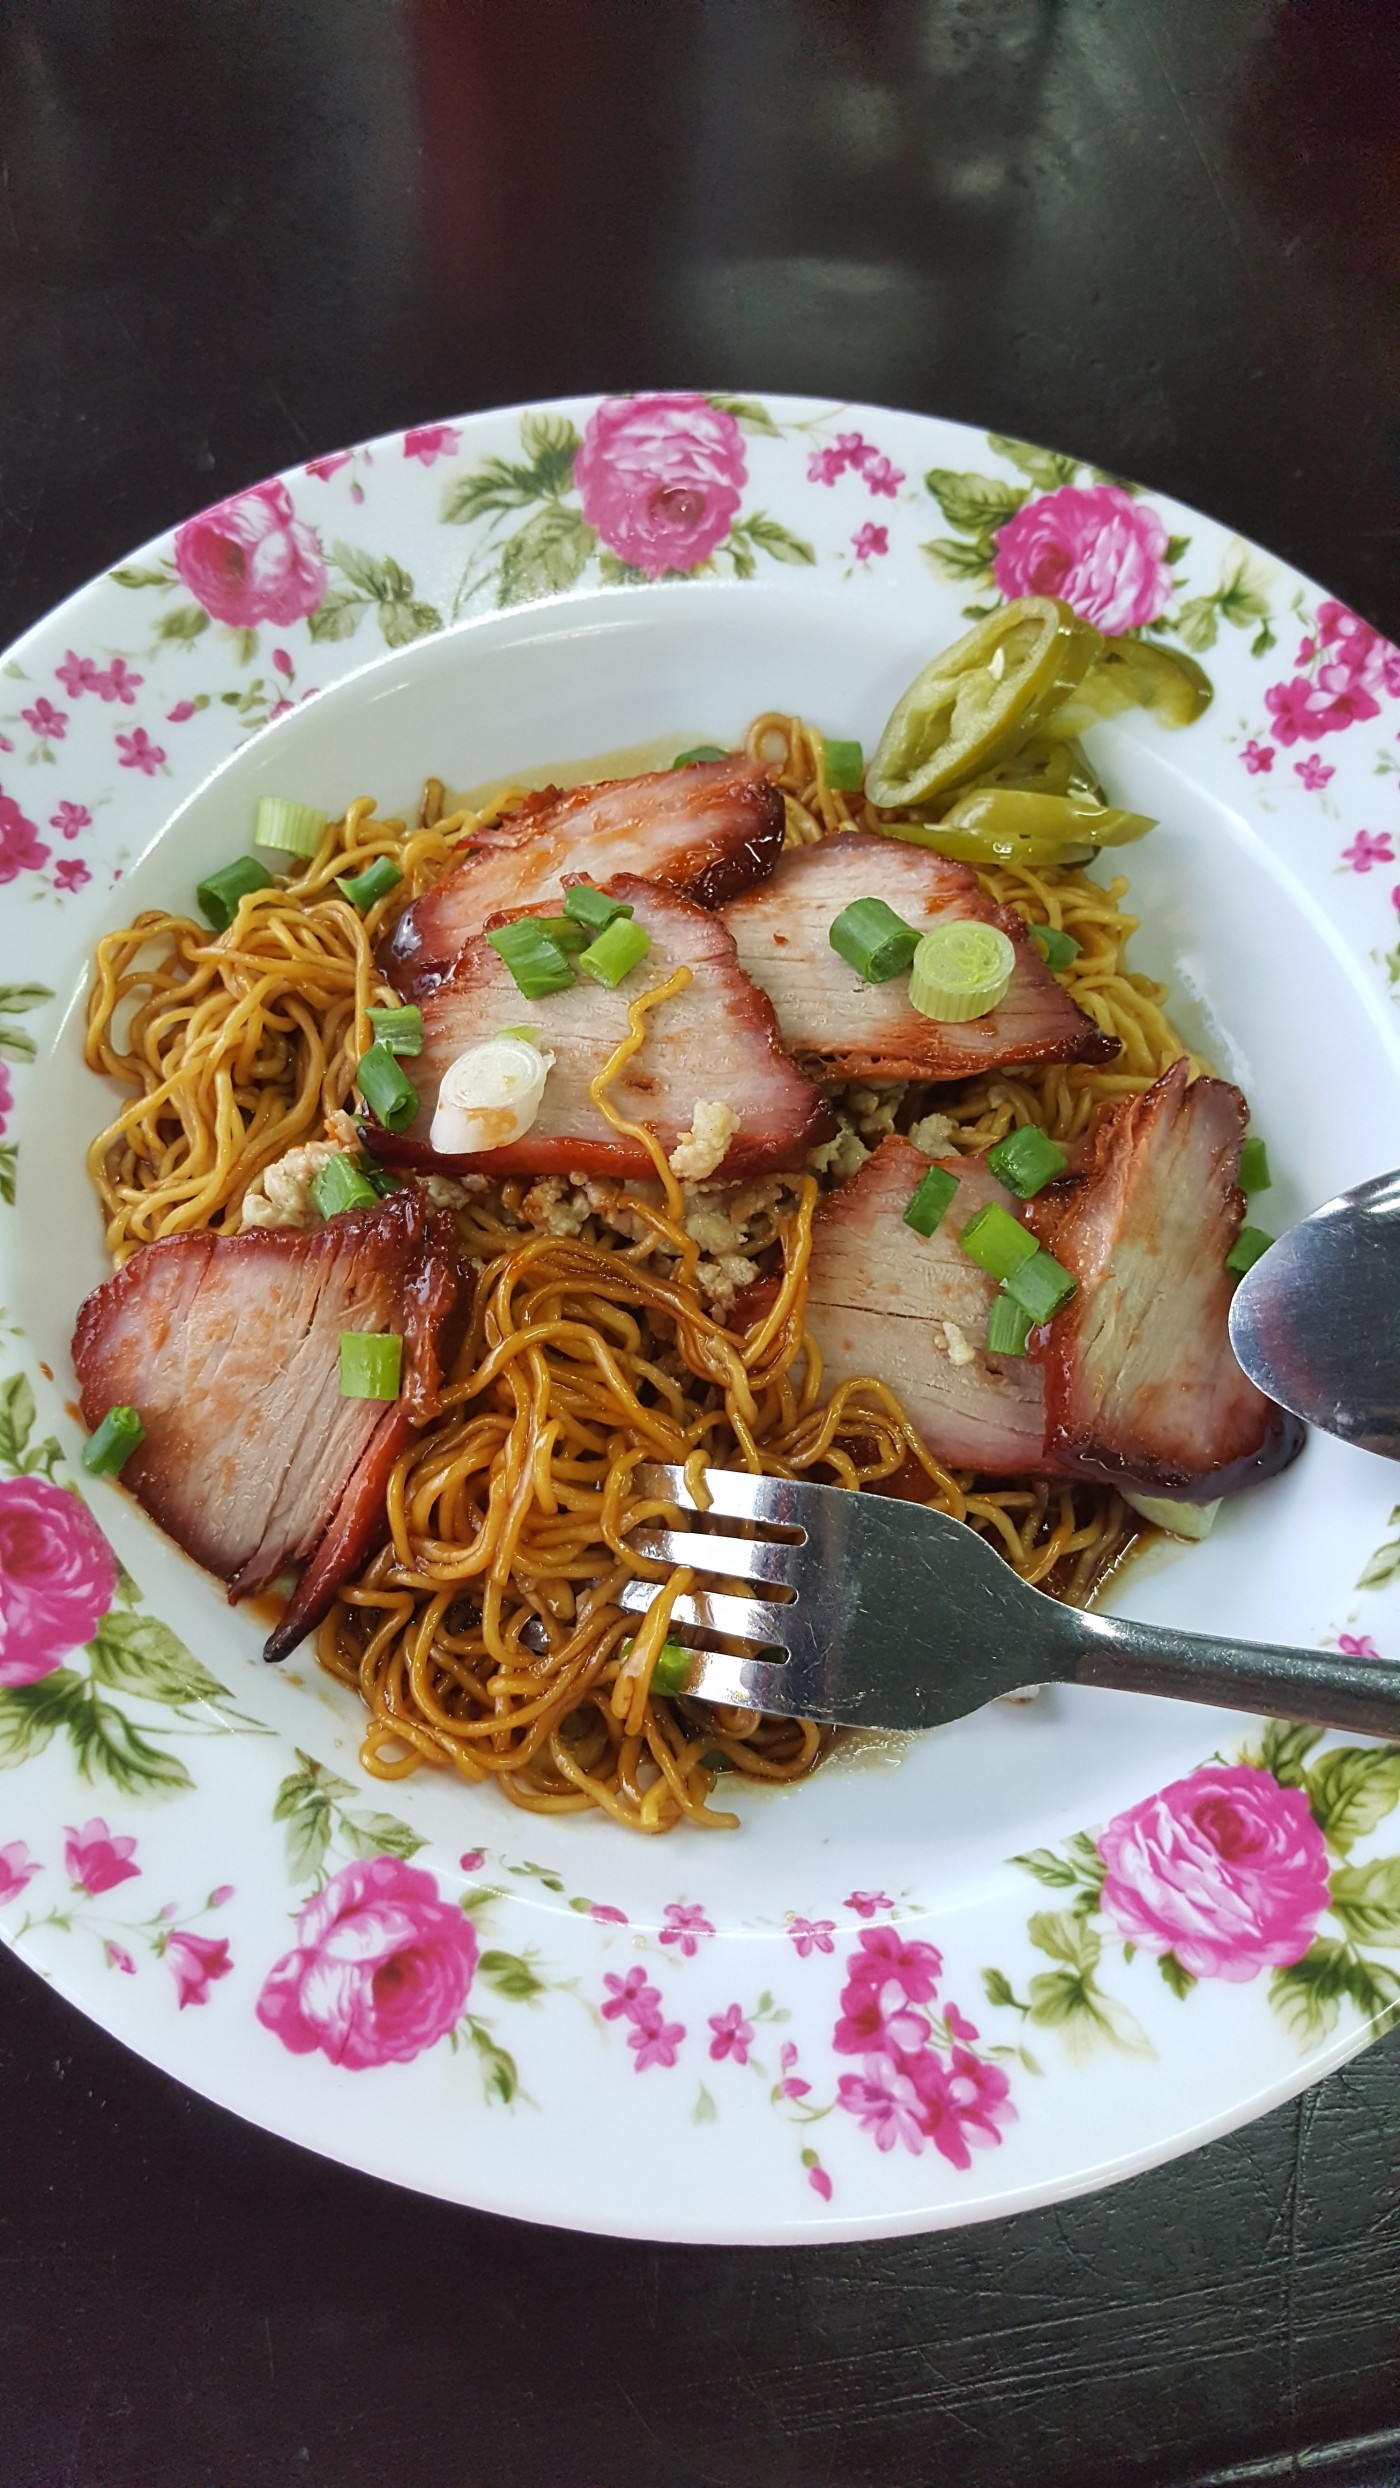 A dish with a rim of painted, pink flowers filled with Cantonese duck noodles: slices of red duck on top of dark noodles